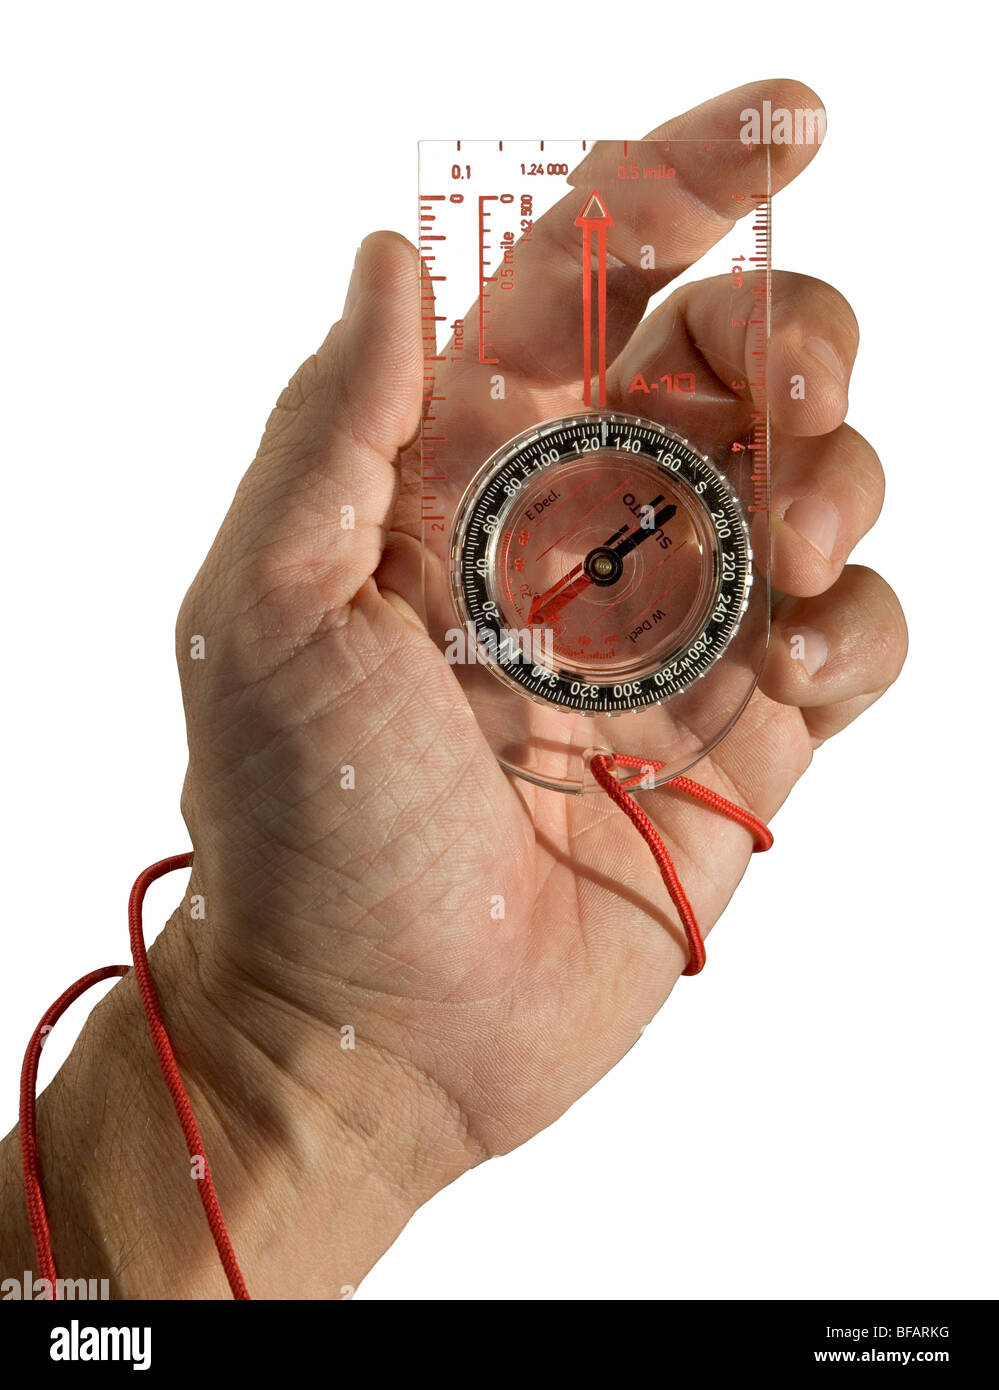 Hand with a hiking compass Stock Photo